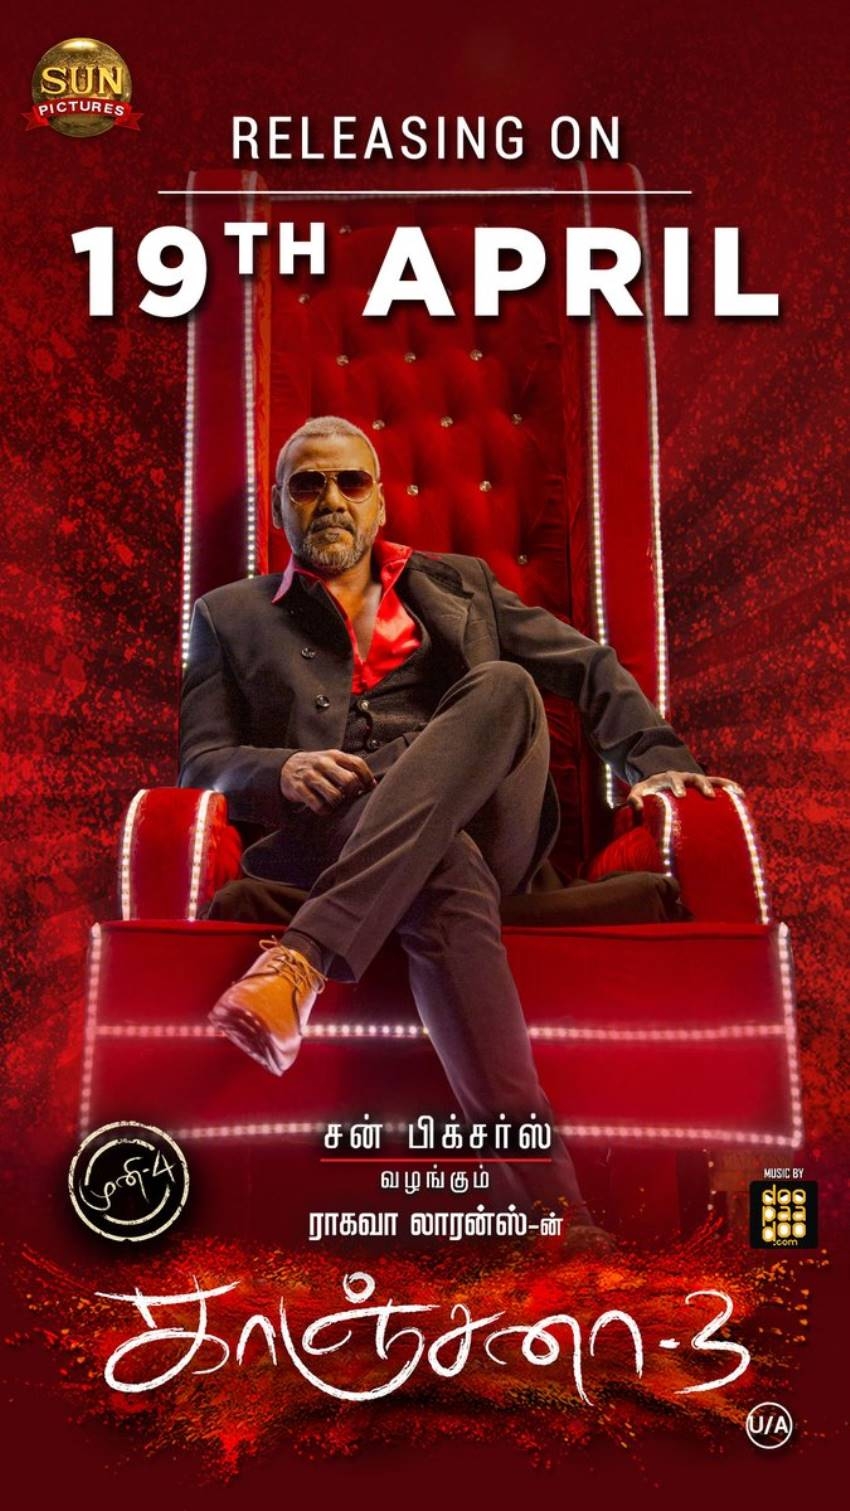 Kanchana Photos HD Image Pictures Stills First Look Posters